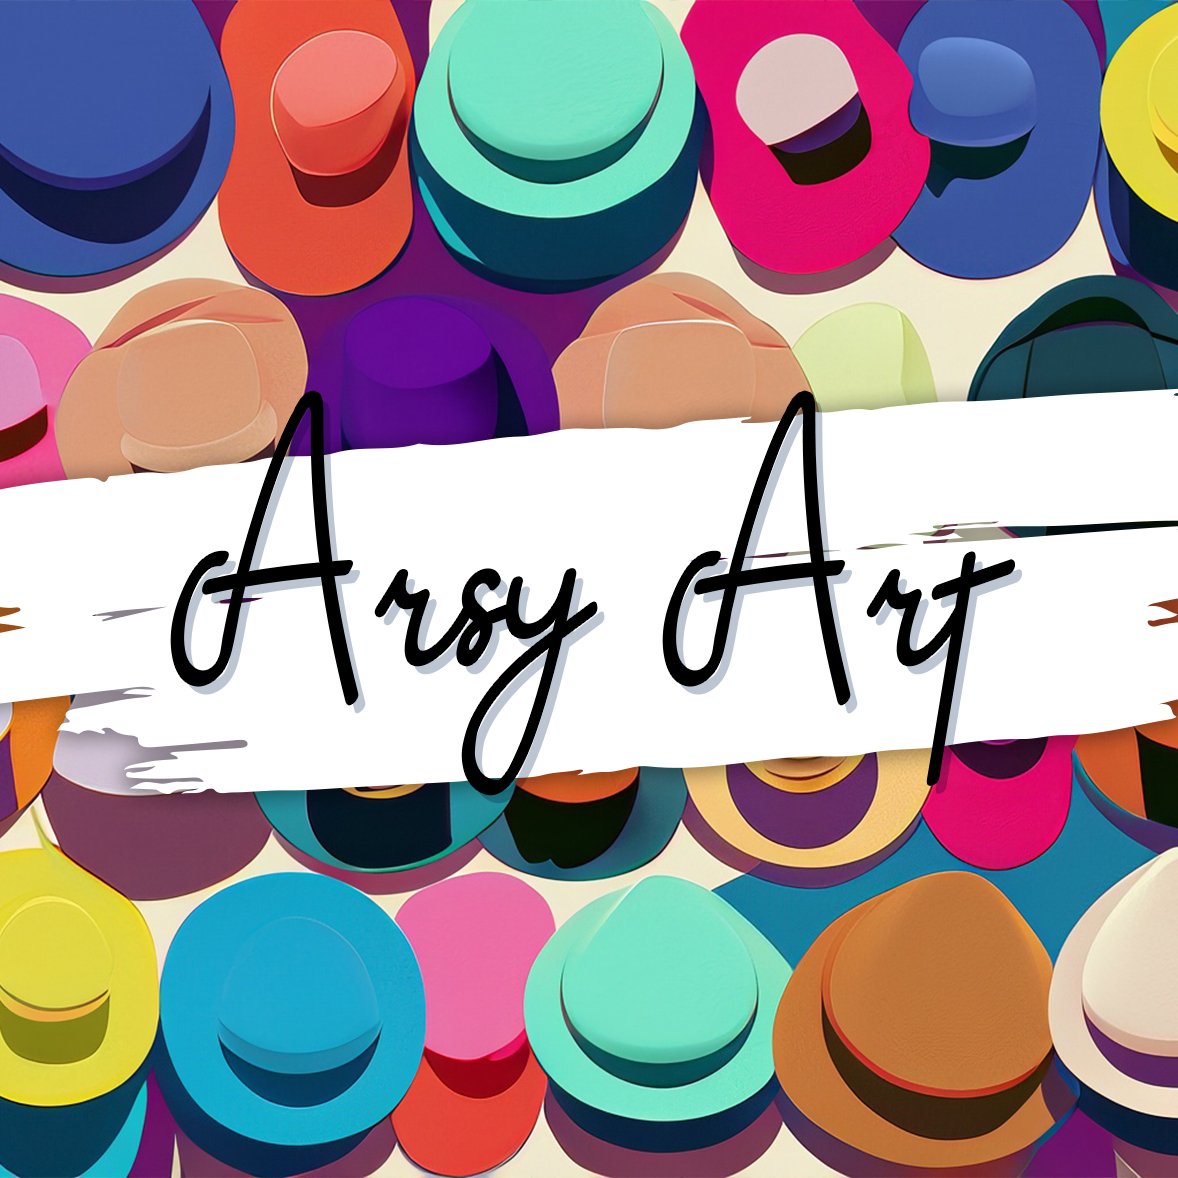 Exclusive Arsy Art Coupon Code – Get Flat 15% Off On All Orders